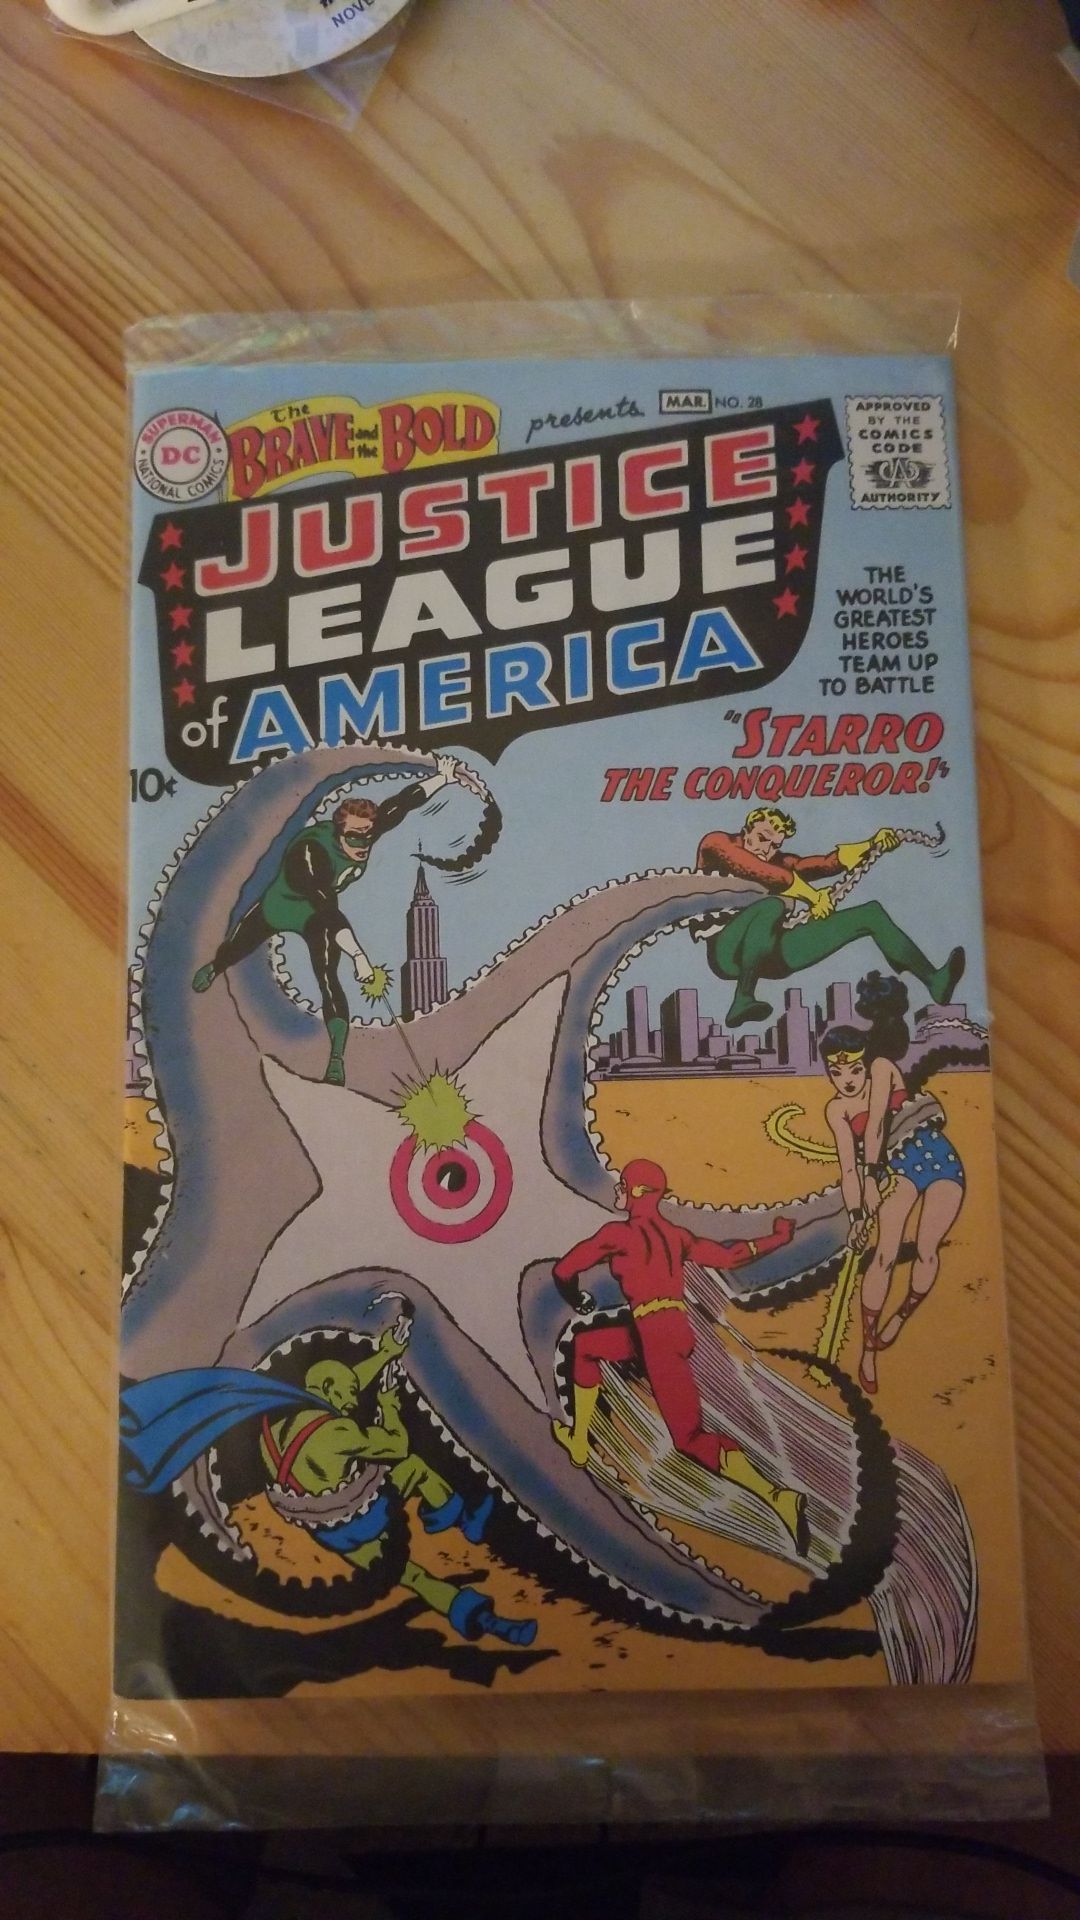 Justice League of America: The Brave and the Bold #28 for Sale in Estero,  FL - OfferUp